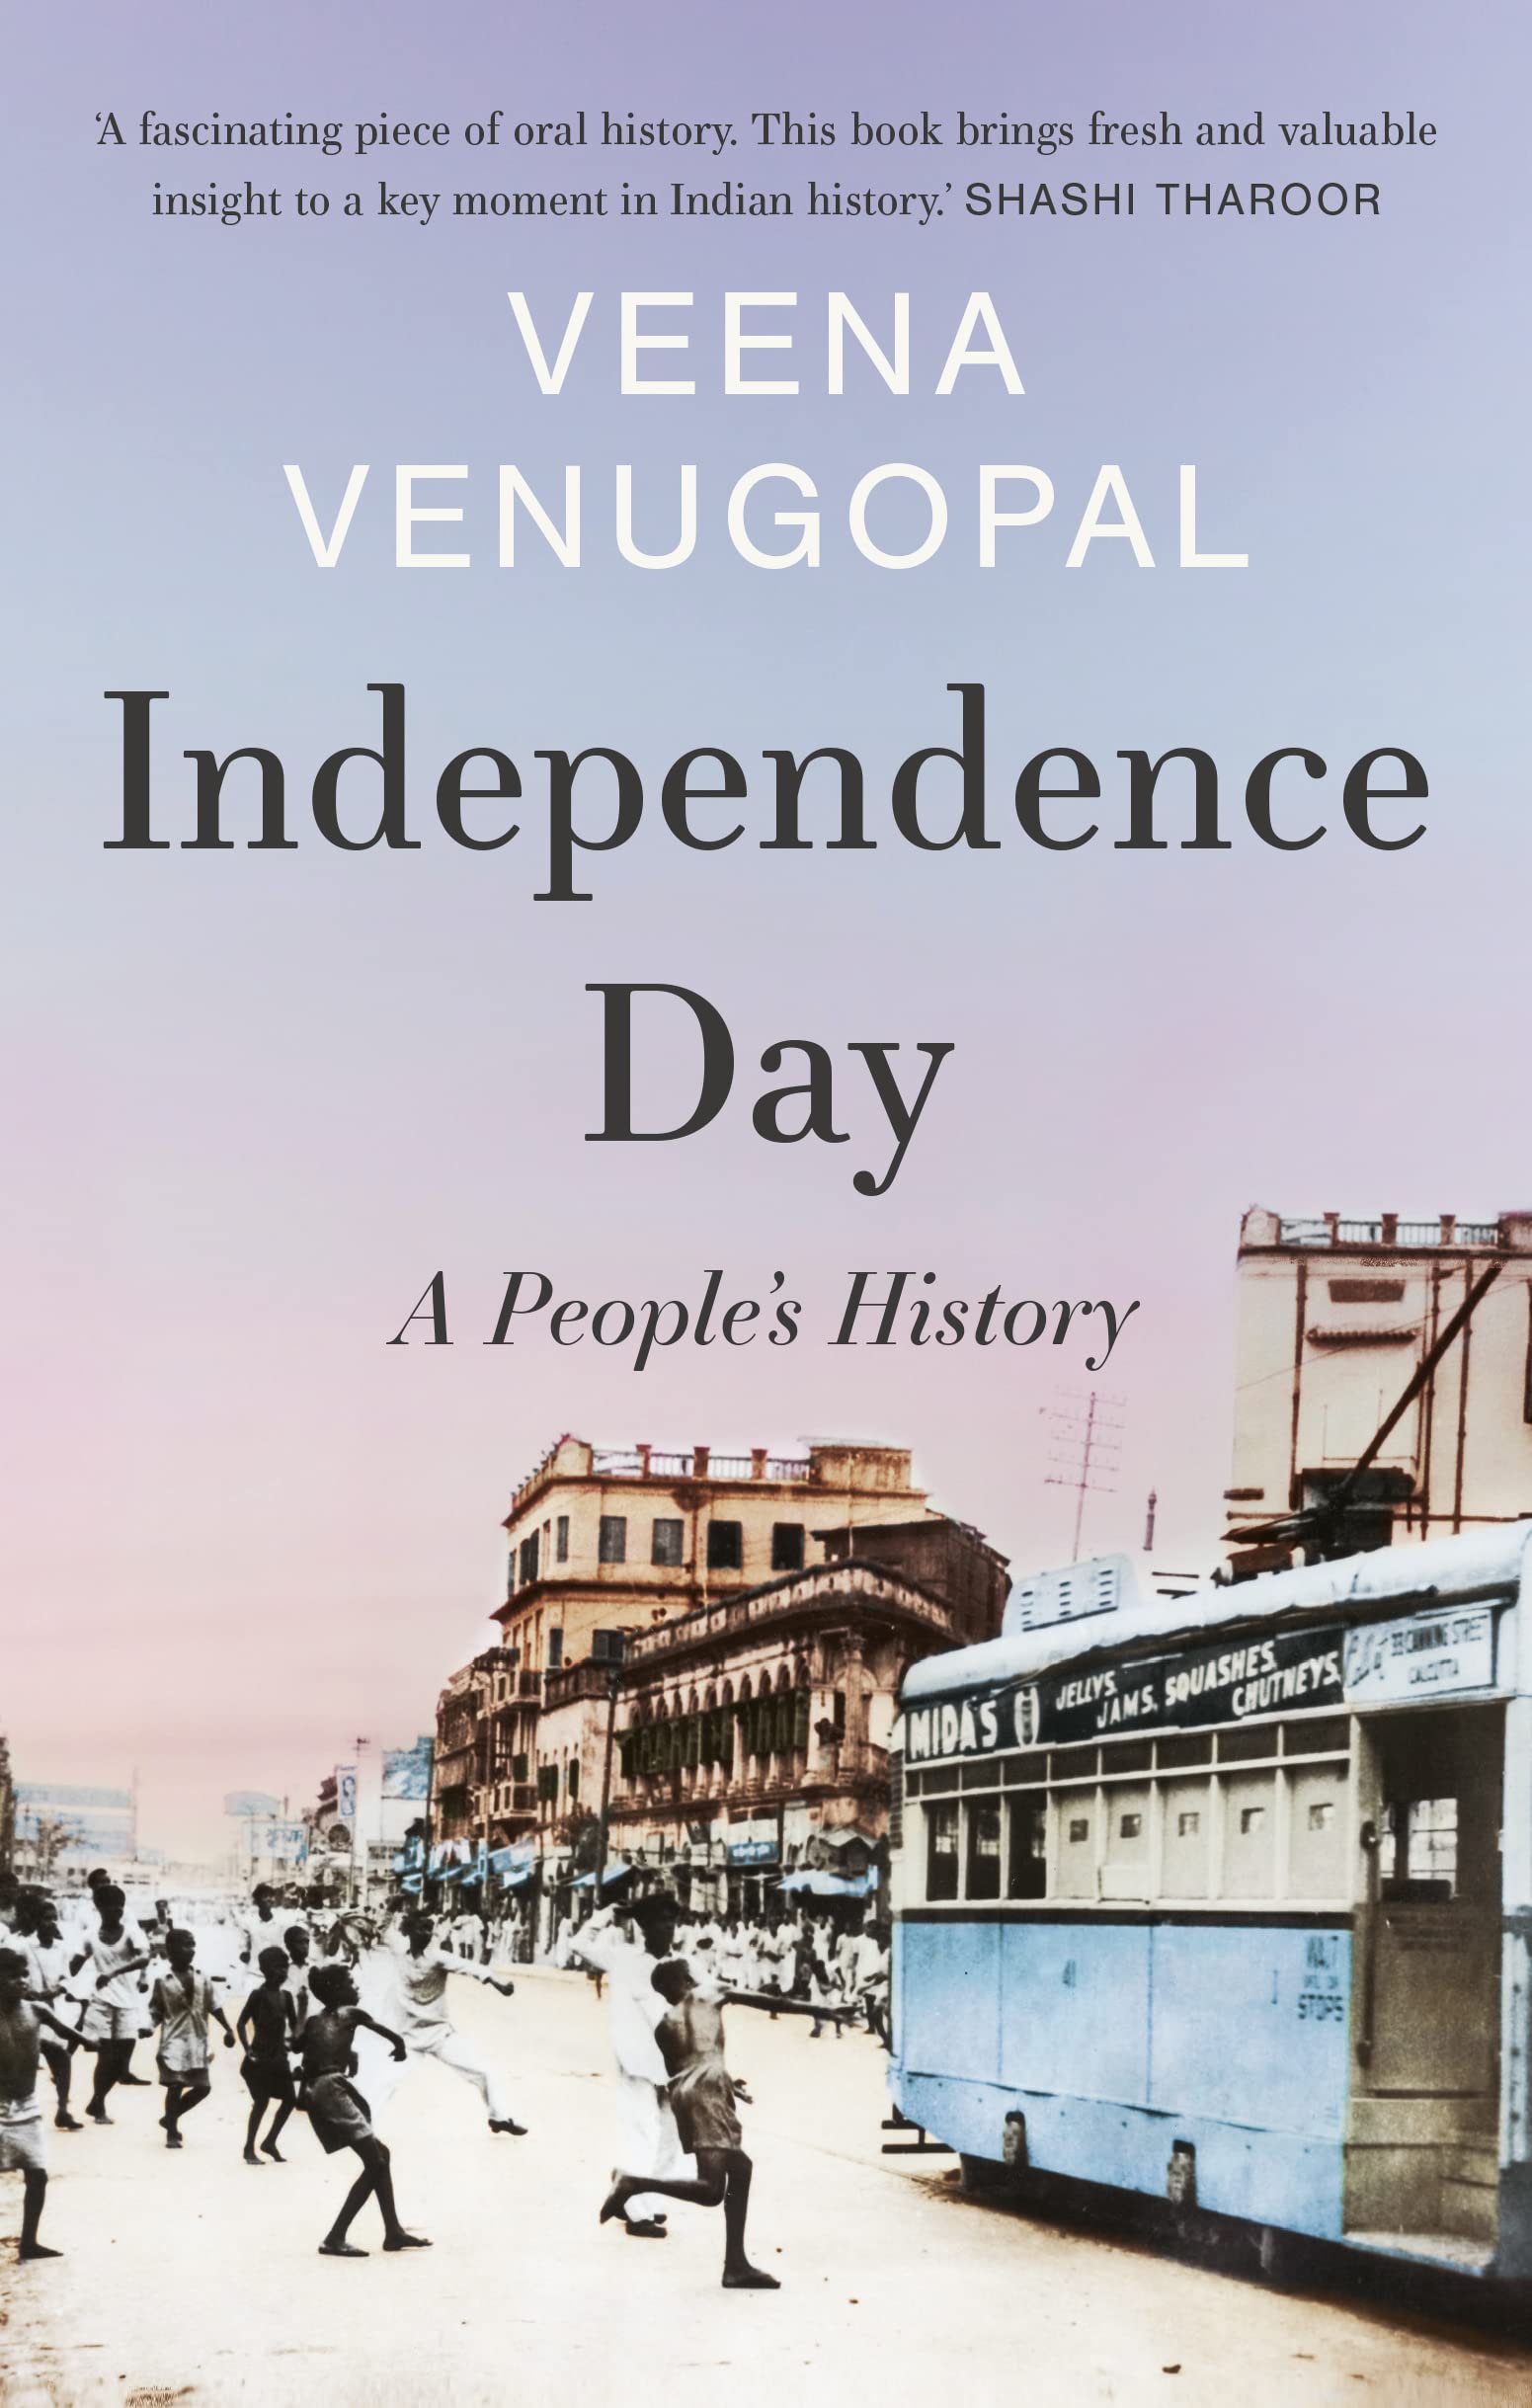 "Independence Day: A People's History": This book makes a slice of India’s history come wholly alive